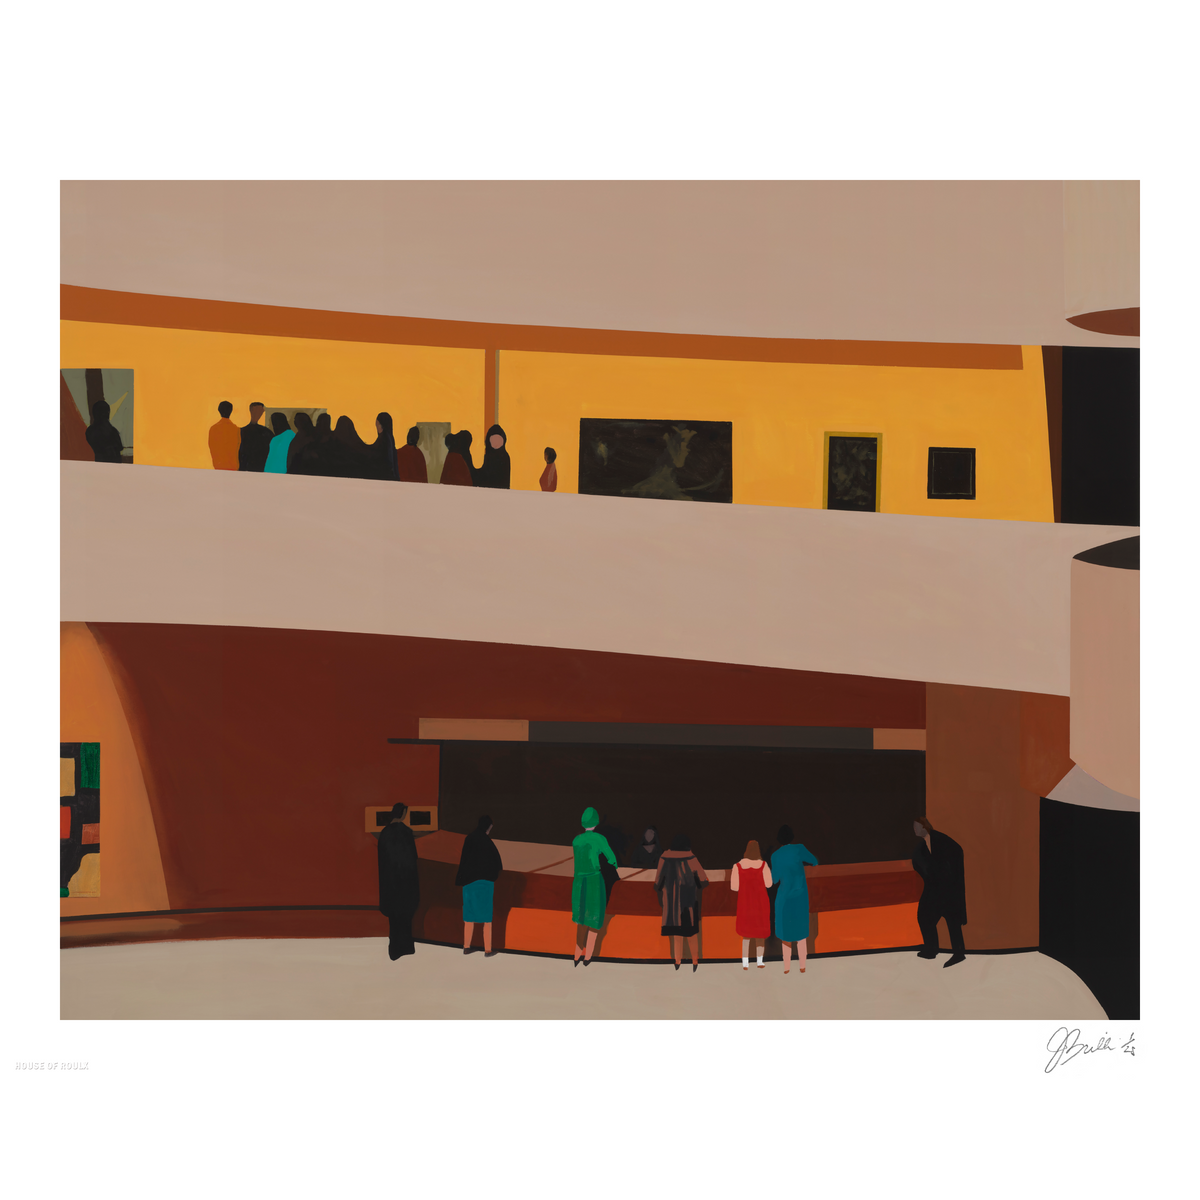 Jessica Brilli &quot;Day at the Guggenheim&quot; - Archival Print, Limited Edition of 25 - 16 x 20&quot;